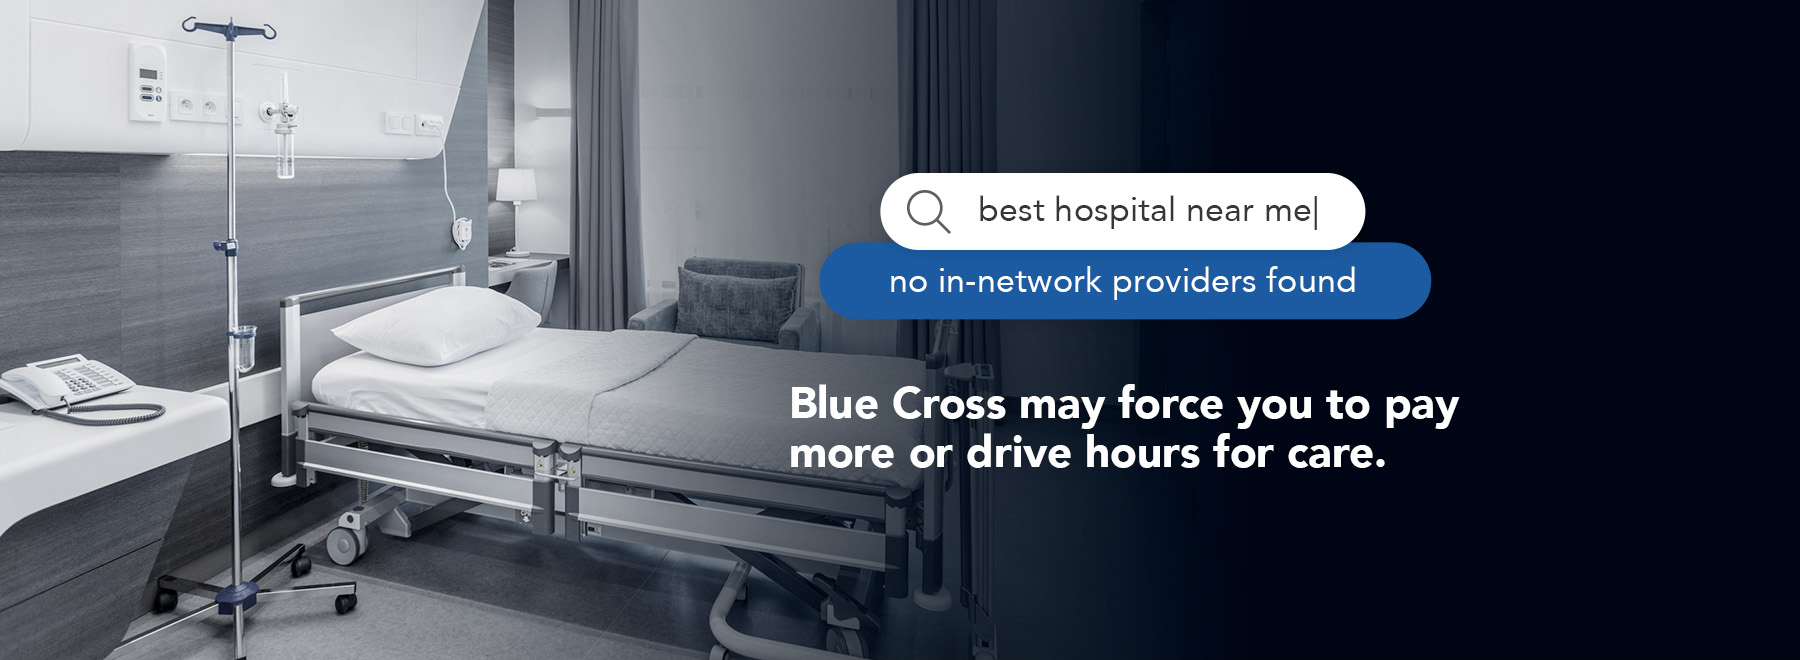 Best hospital near me. No in-network providers found. Blue Cross may force you to pay more or drive hours for care.